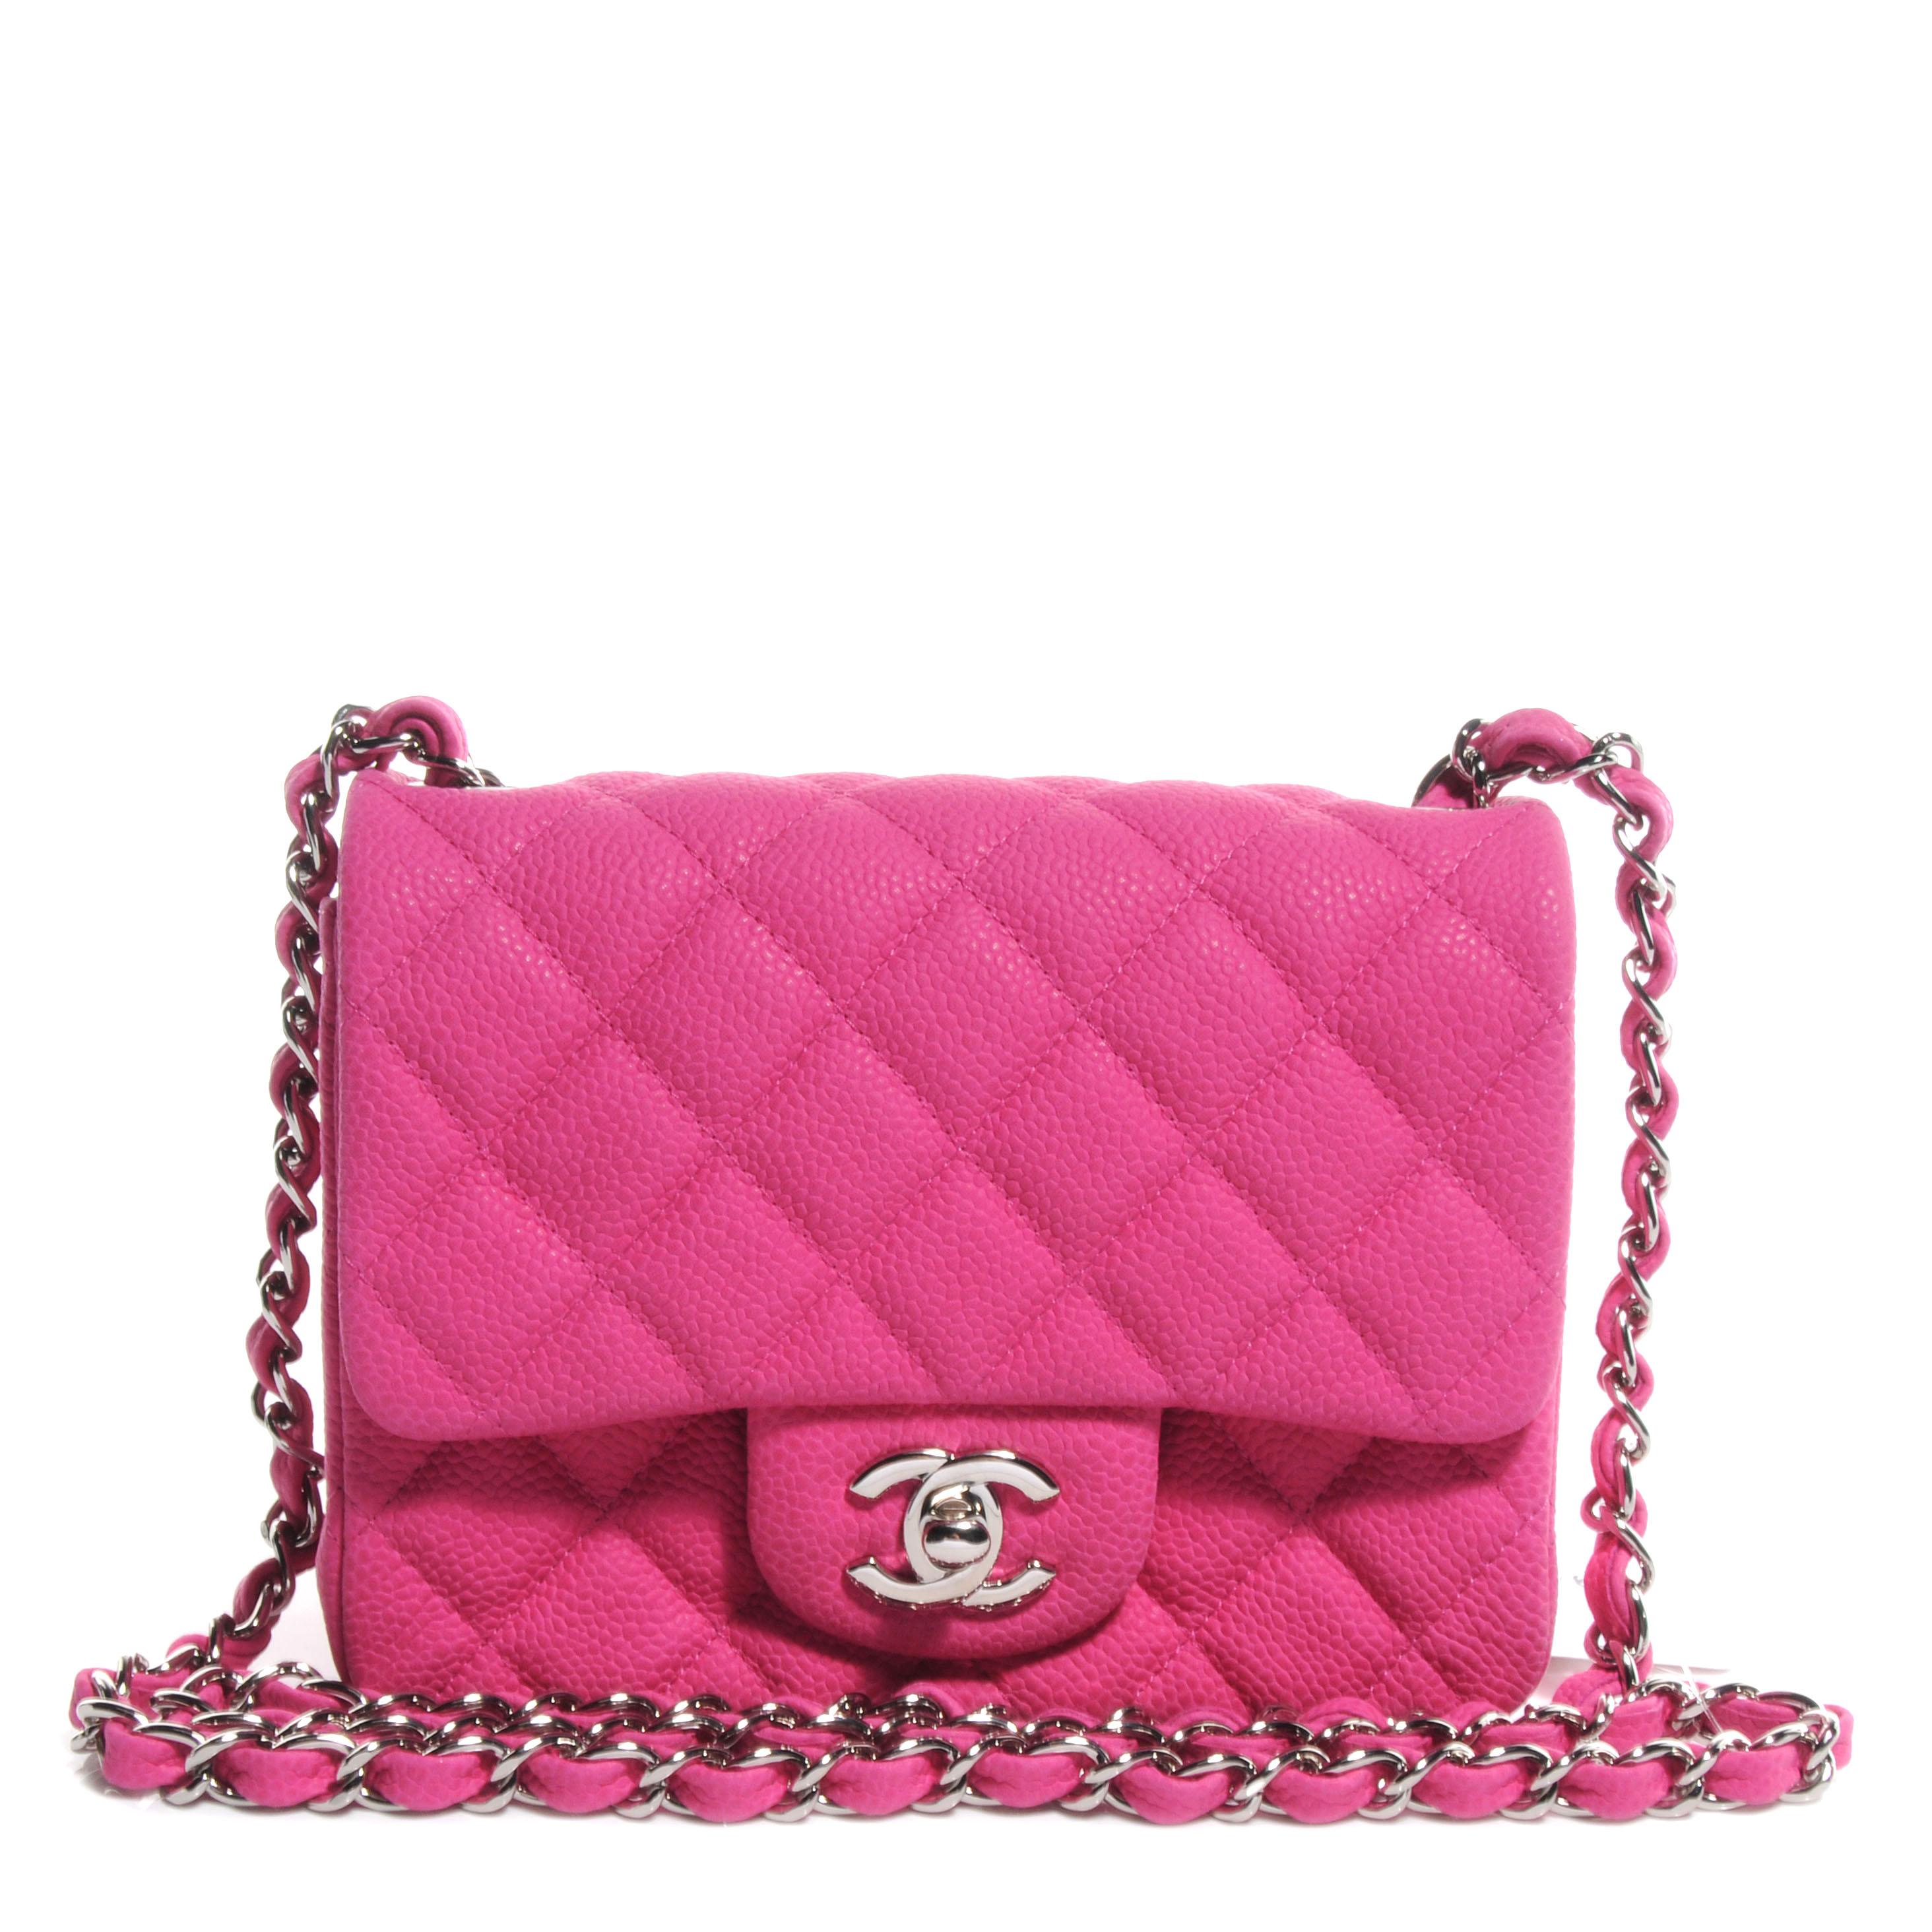 CHANEL Iridescent Caviar Quilted Mini Flap Hot Pink 59882 | FASHIONPHILE